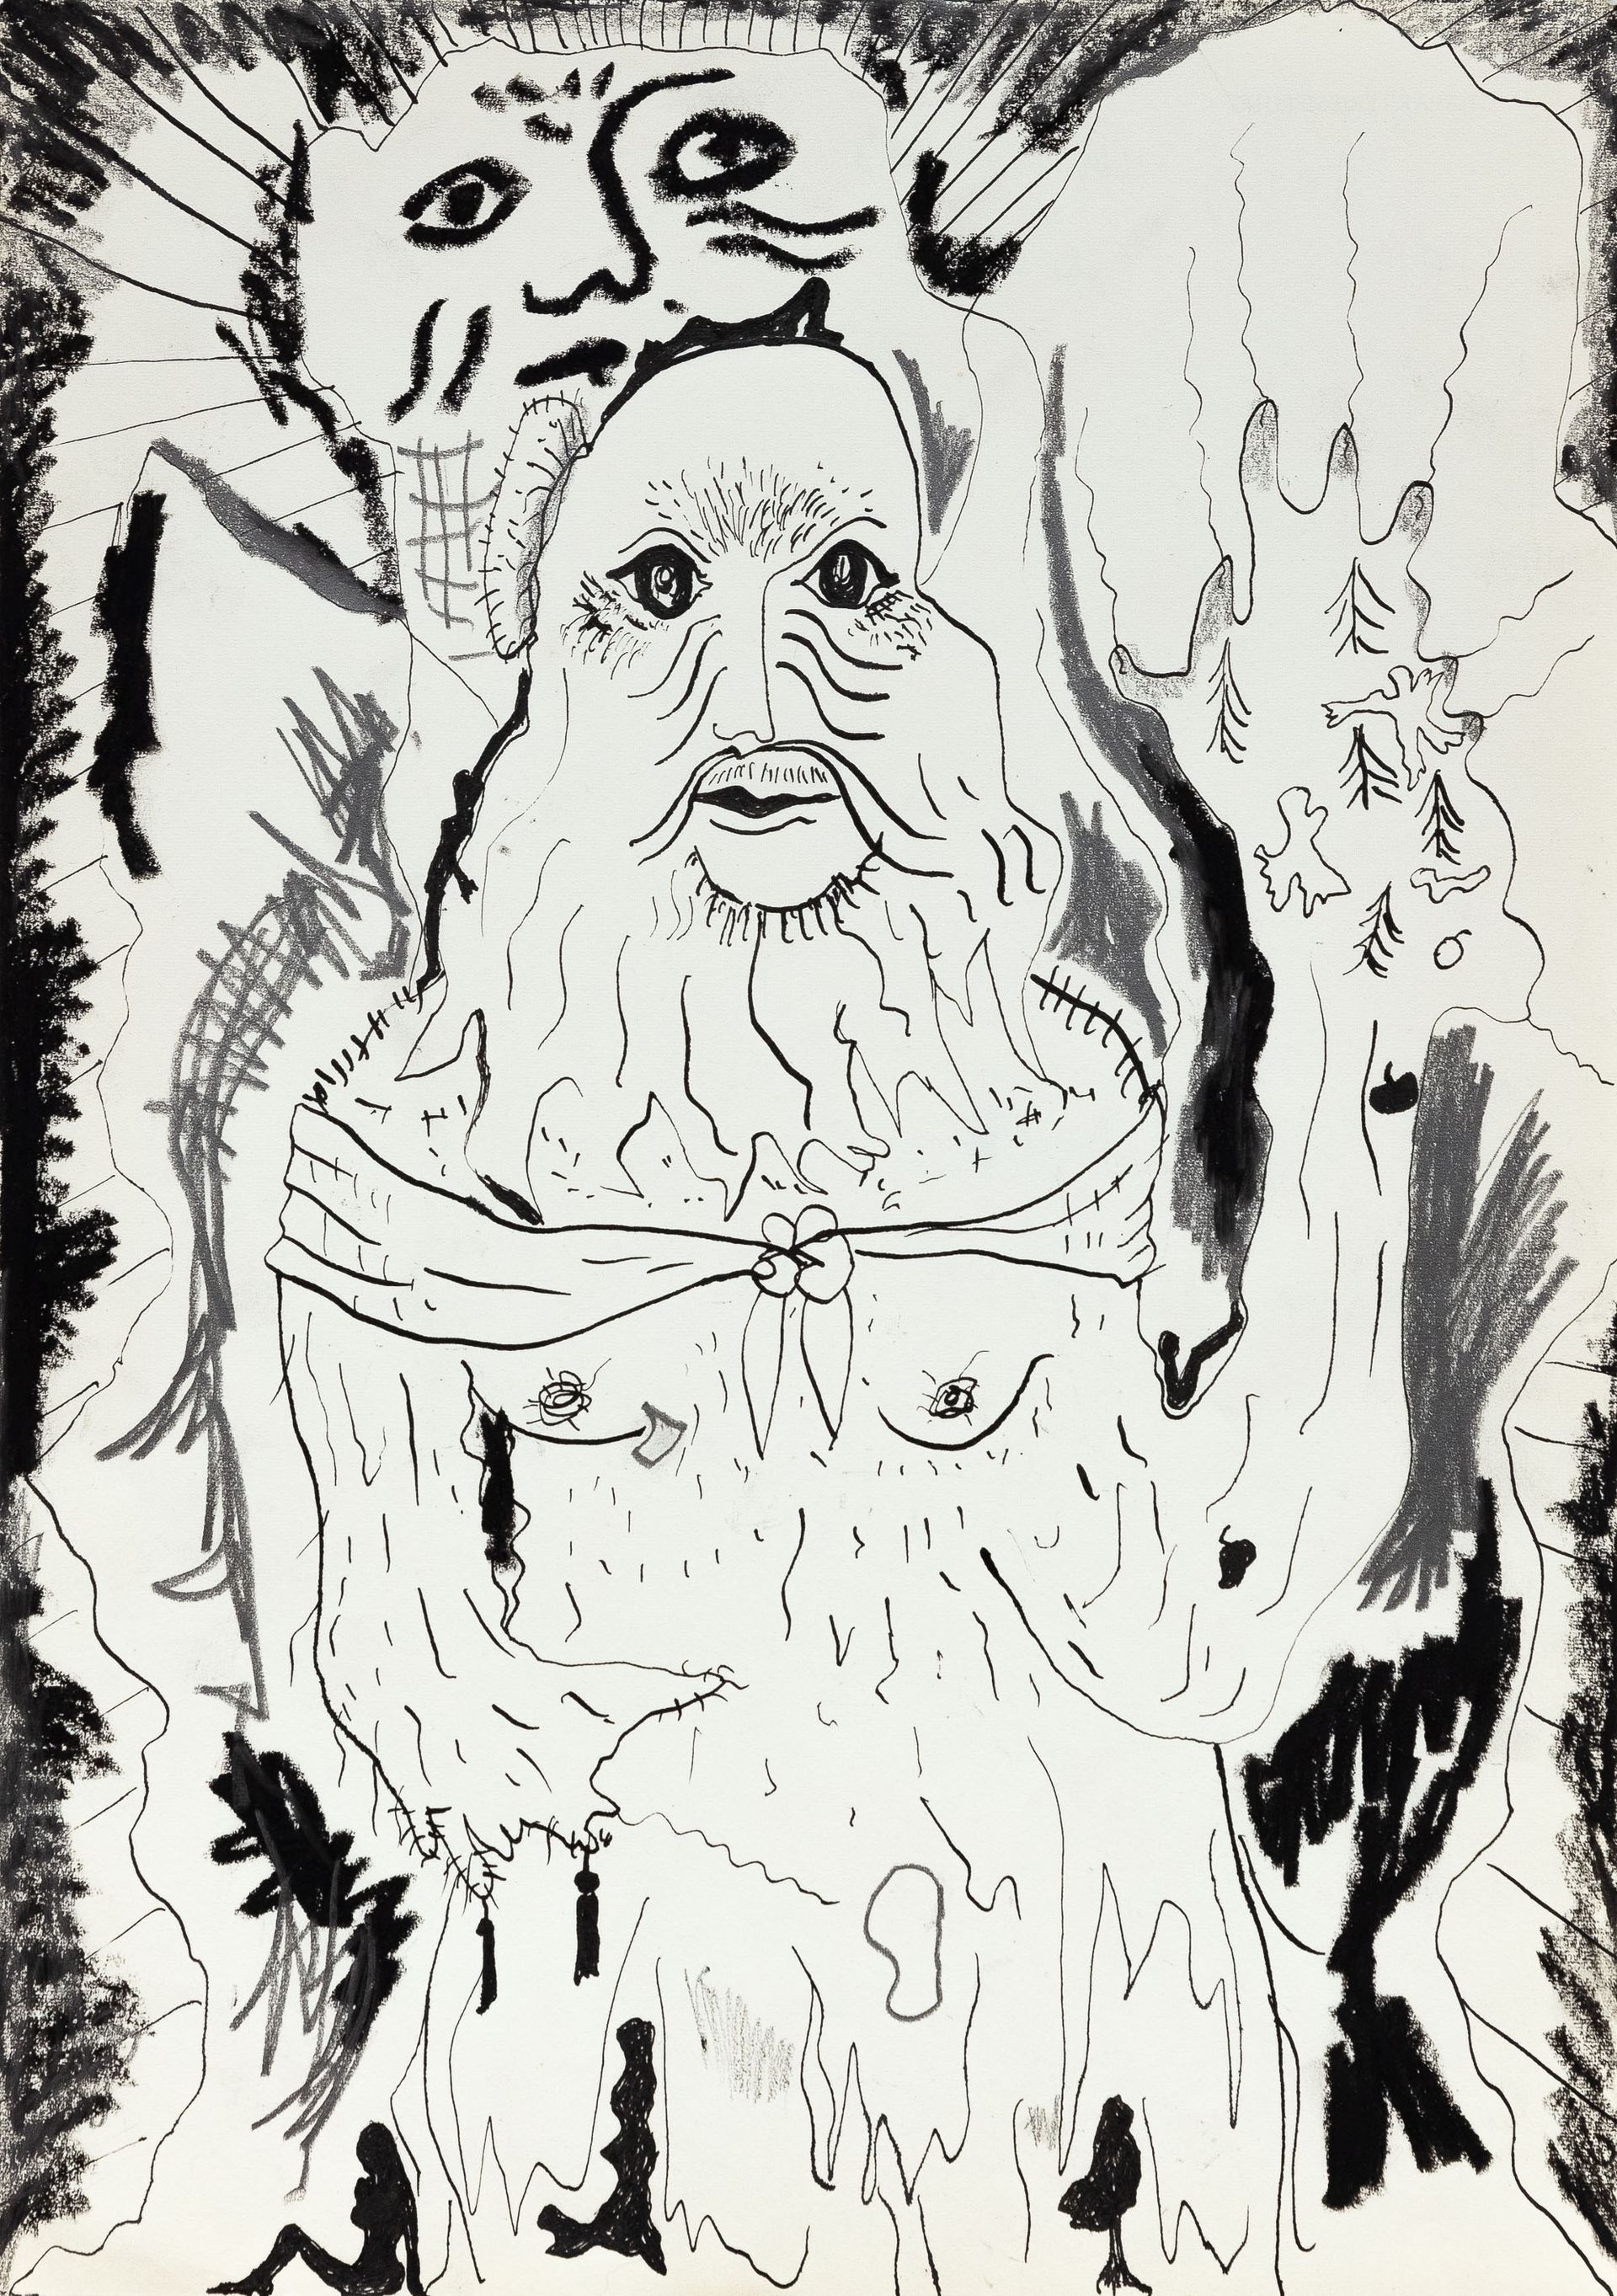 Anna McCarthy, Hairy Hermitess, 2021, ink, pencil and crayon on paper, 30 × 21 cm, photo: Sebastian Kissel